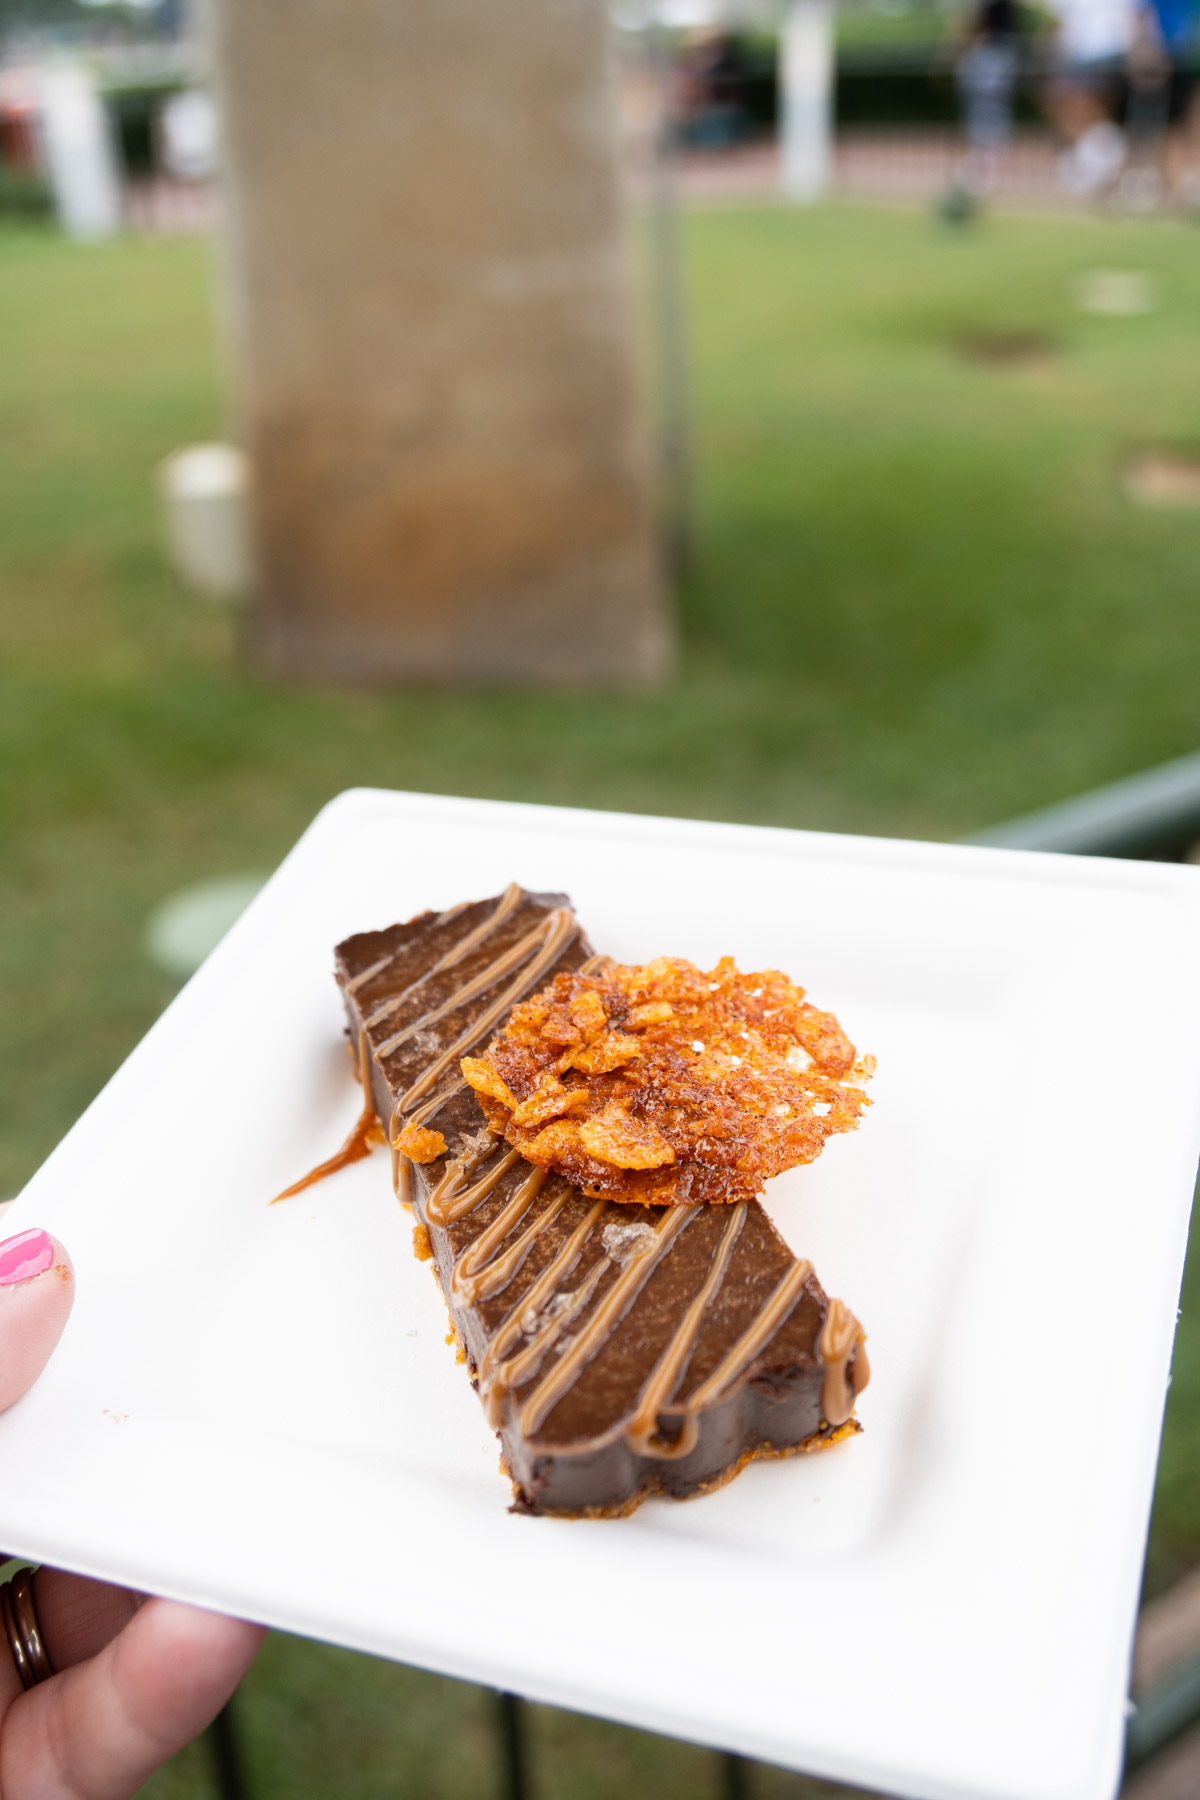 spiced choclate tart at the 2023 Epcot food and wine festival